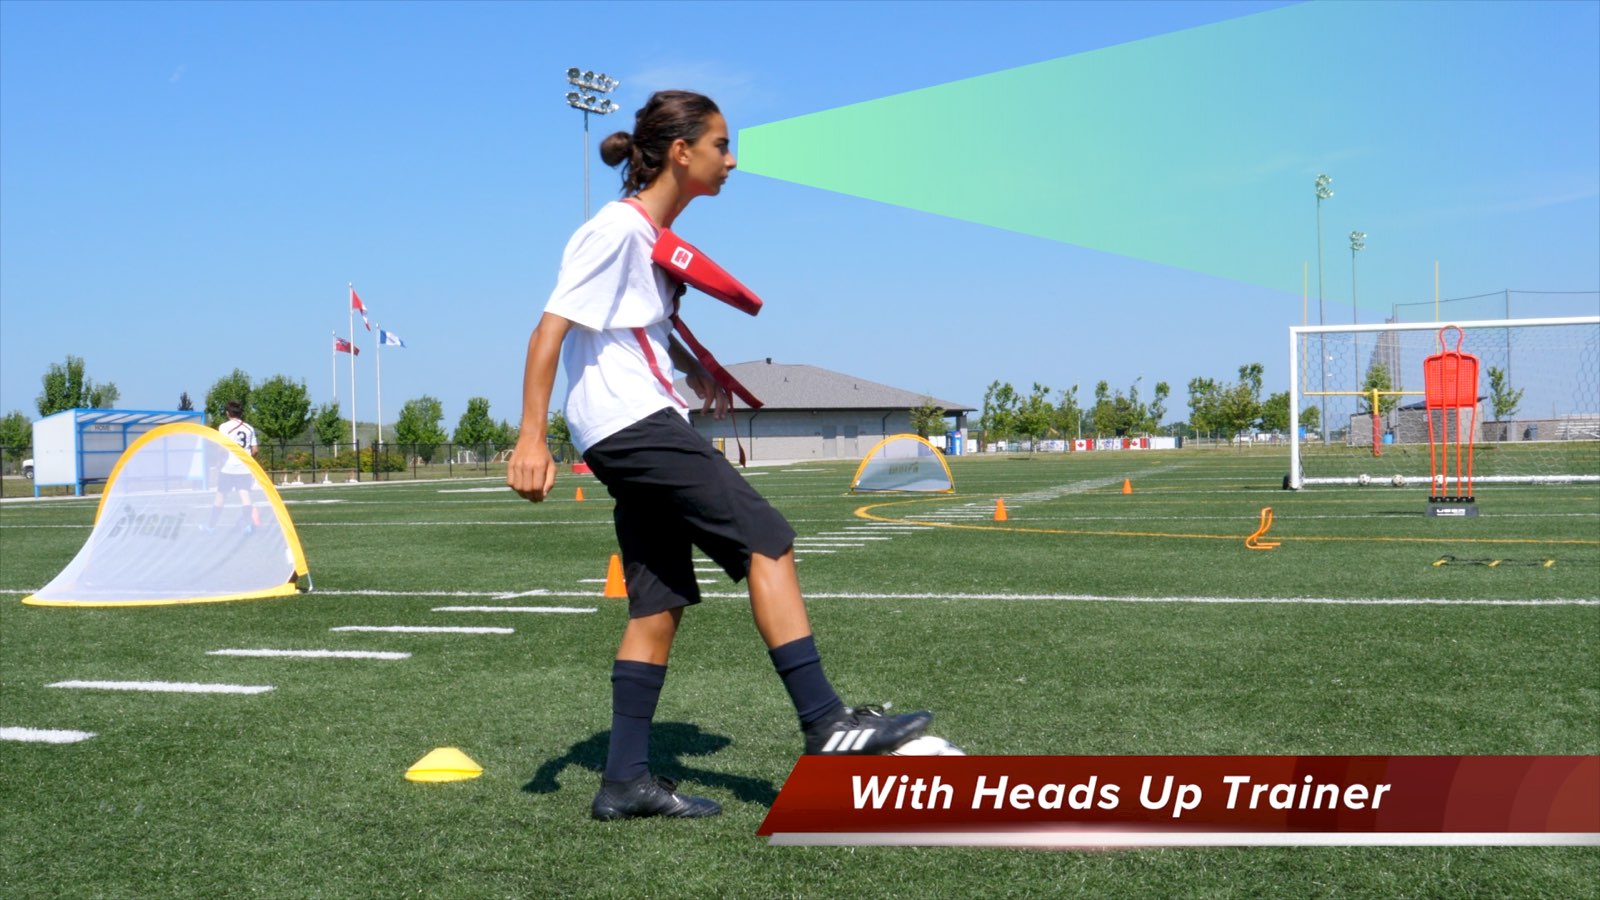 Heads Up Trainer 10